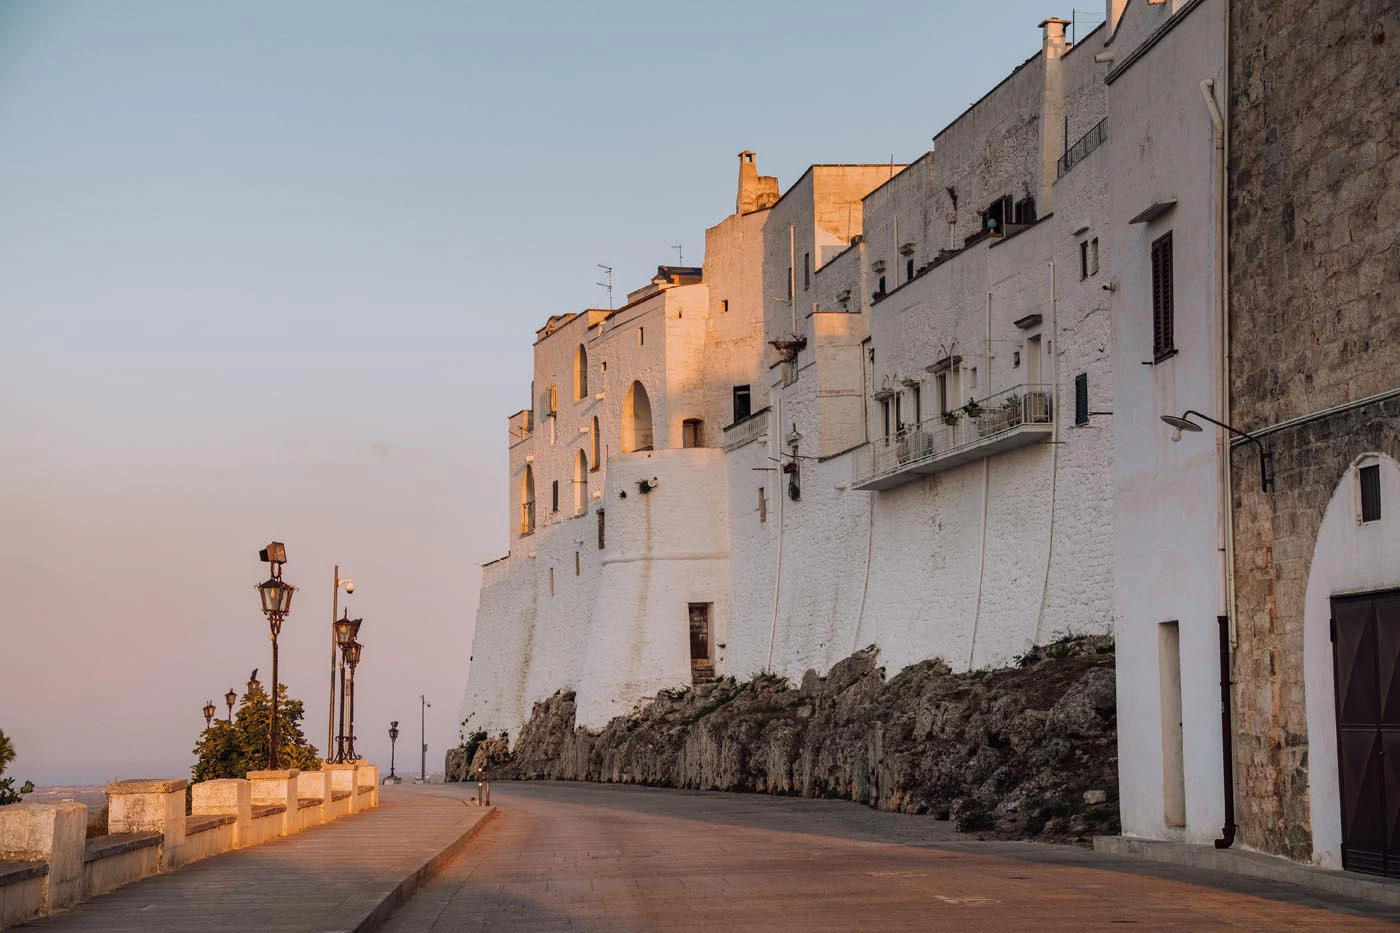 Things to do in Ostuni - Walk along City walls